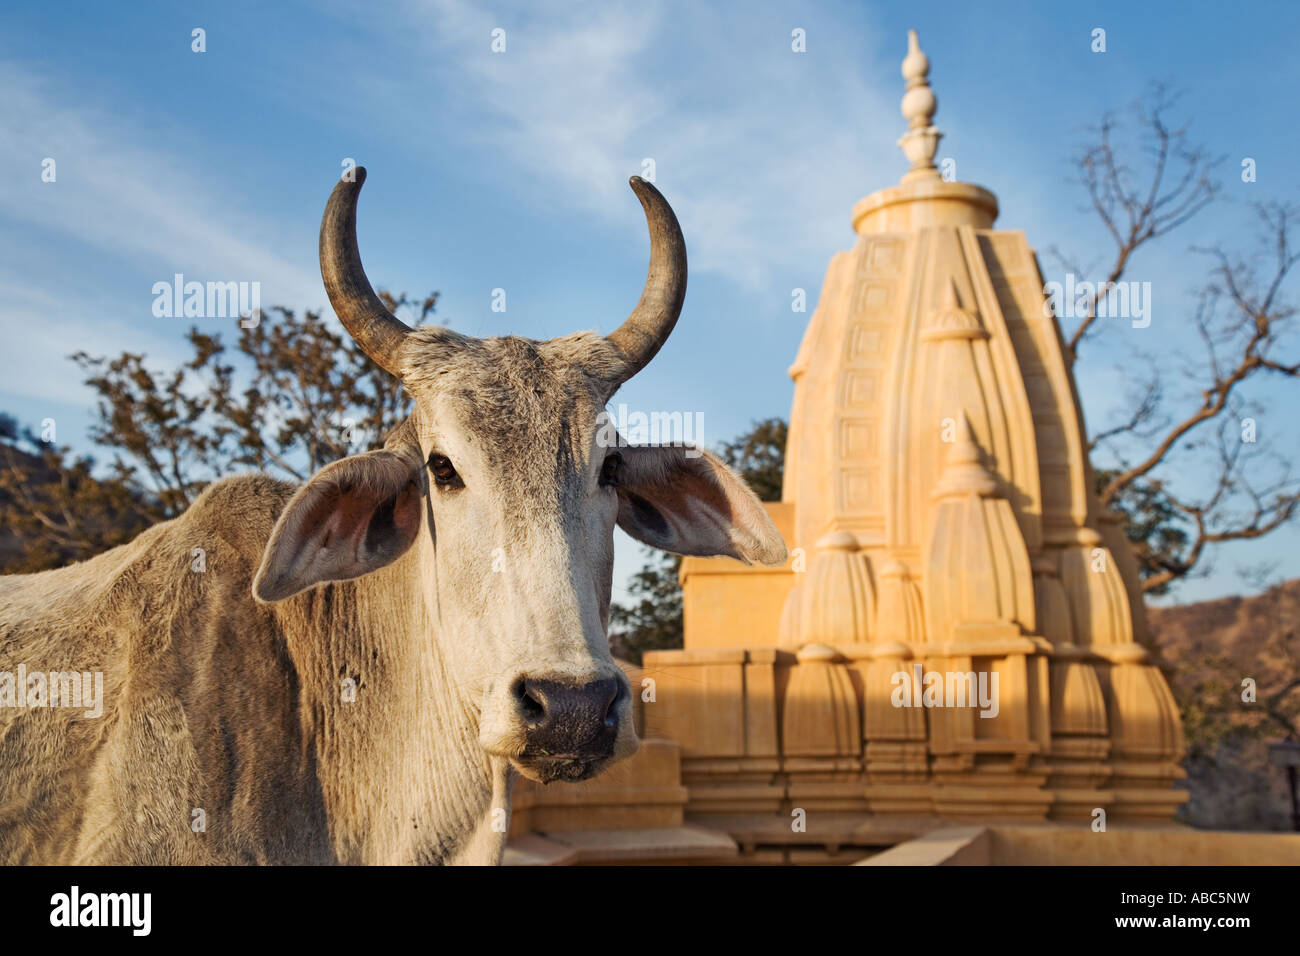 Holy Cow in front of a small Hindu temple in Jaipur India Stock Photo